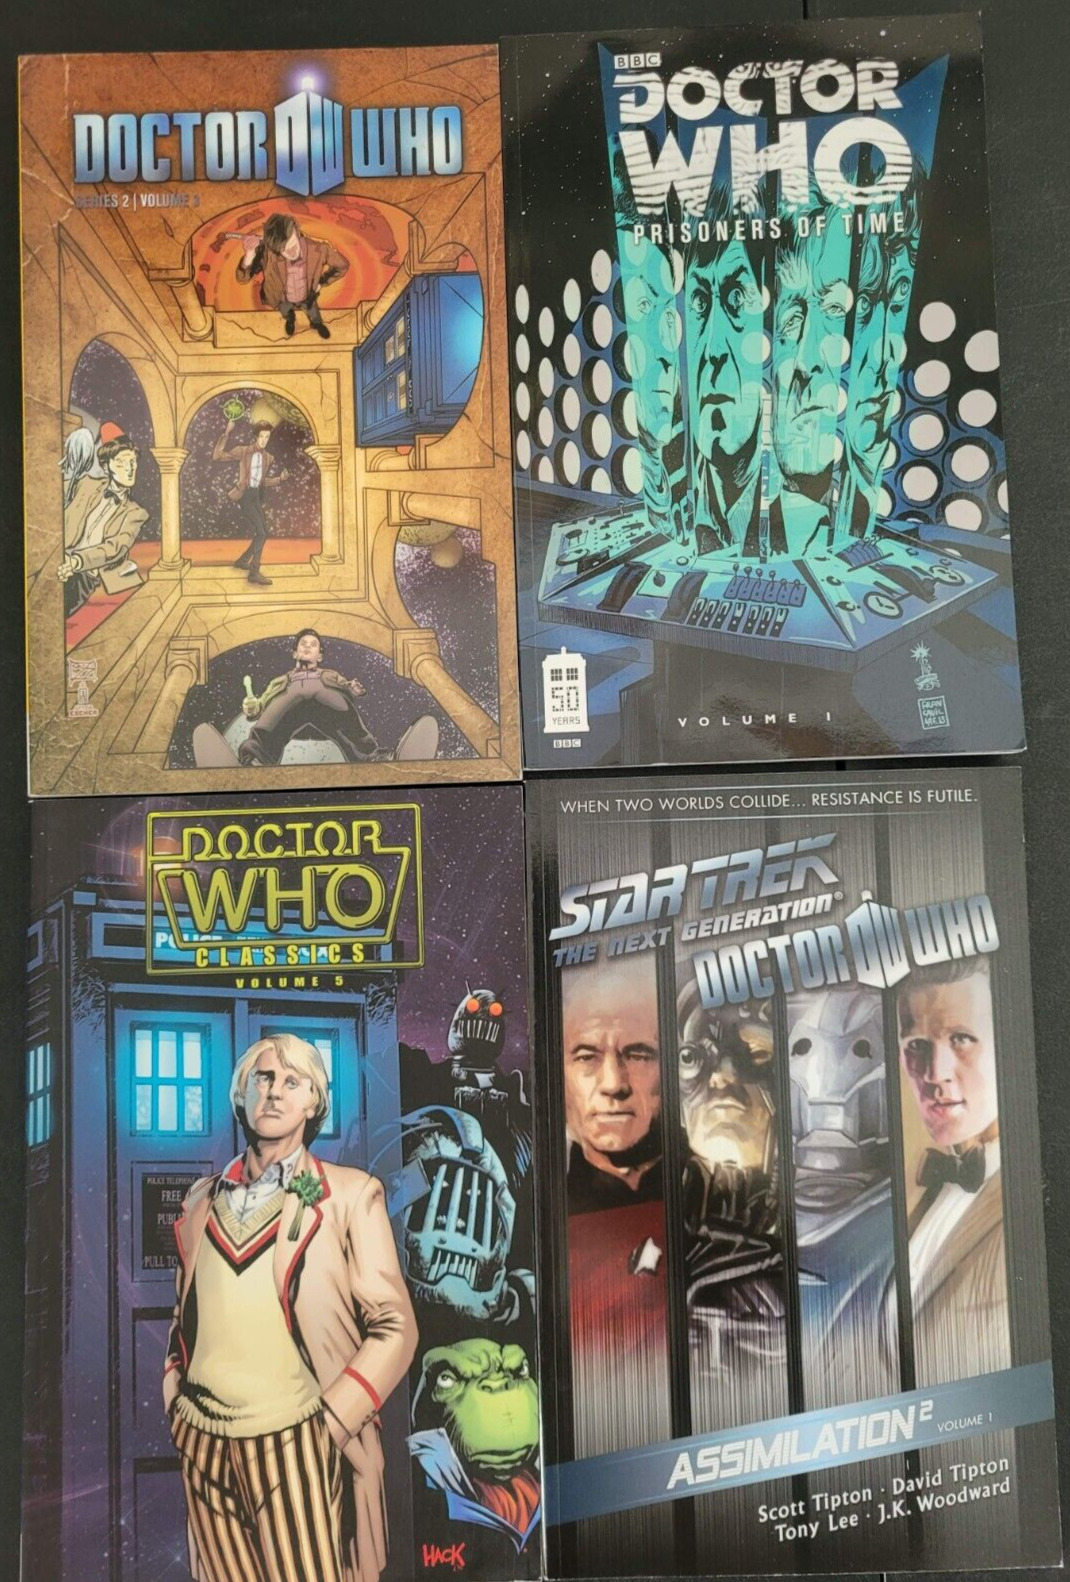 DOCTOR WHO SET OF 7 TPB/GRAPHIC NOVEL/BOOK IDW COMICS 13TH DOCTOR\'S GUIDE+